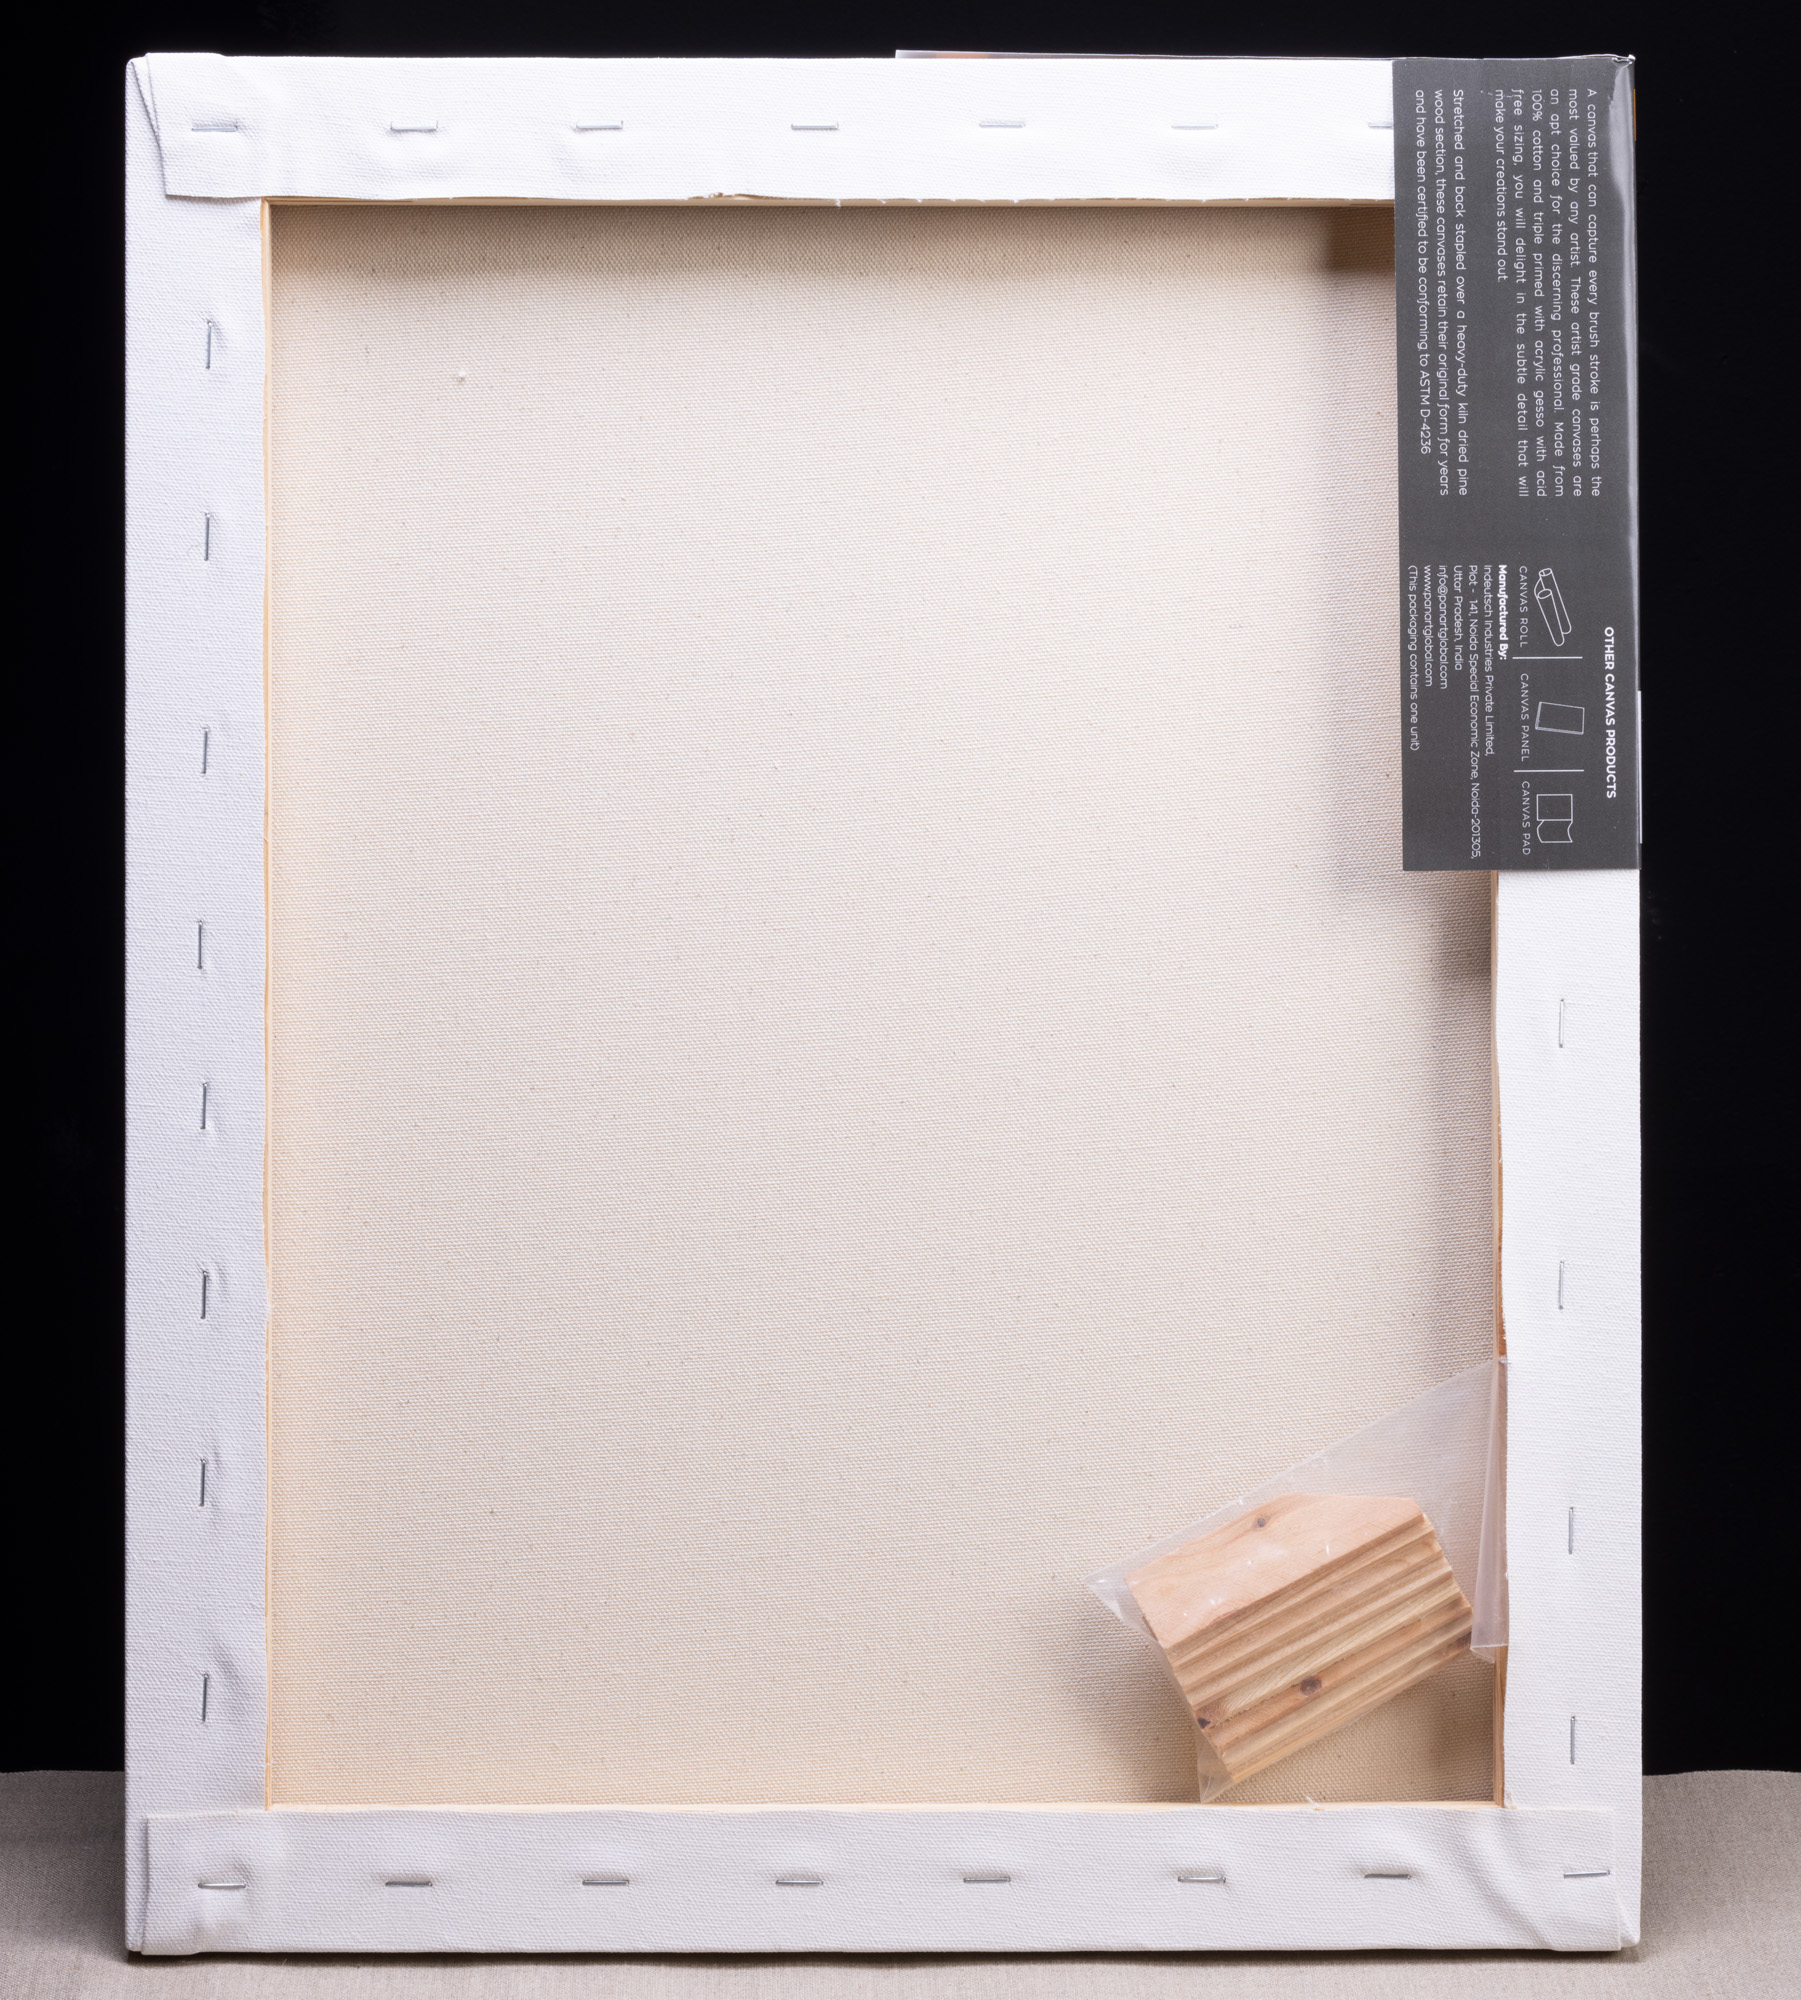 PANART Machine stretched canvas 350g/m² with gesso primed cotton